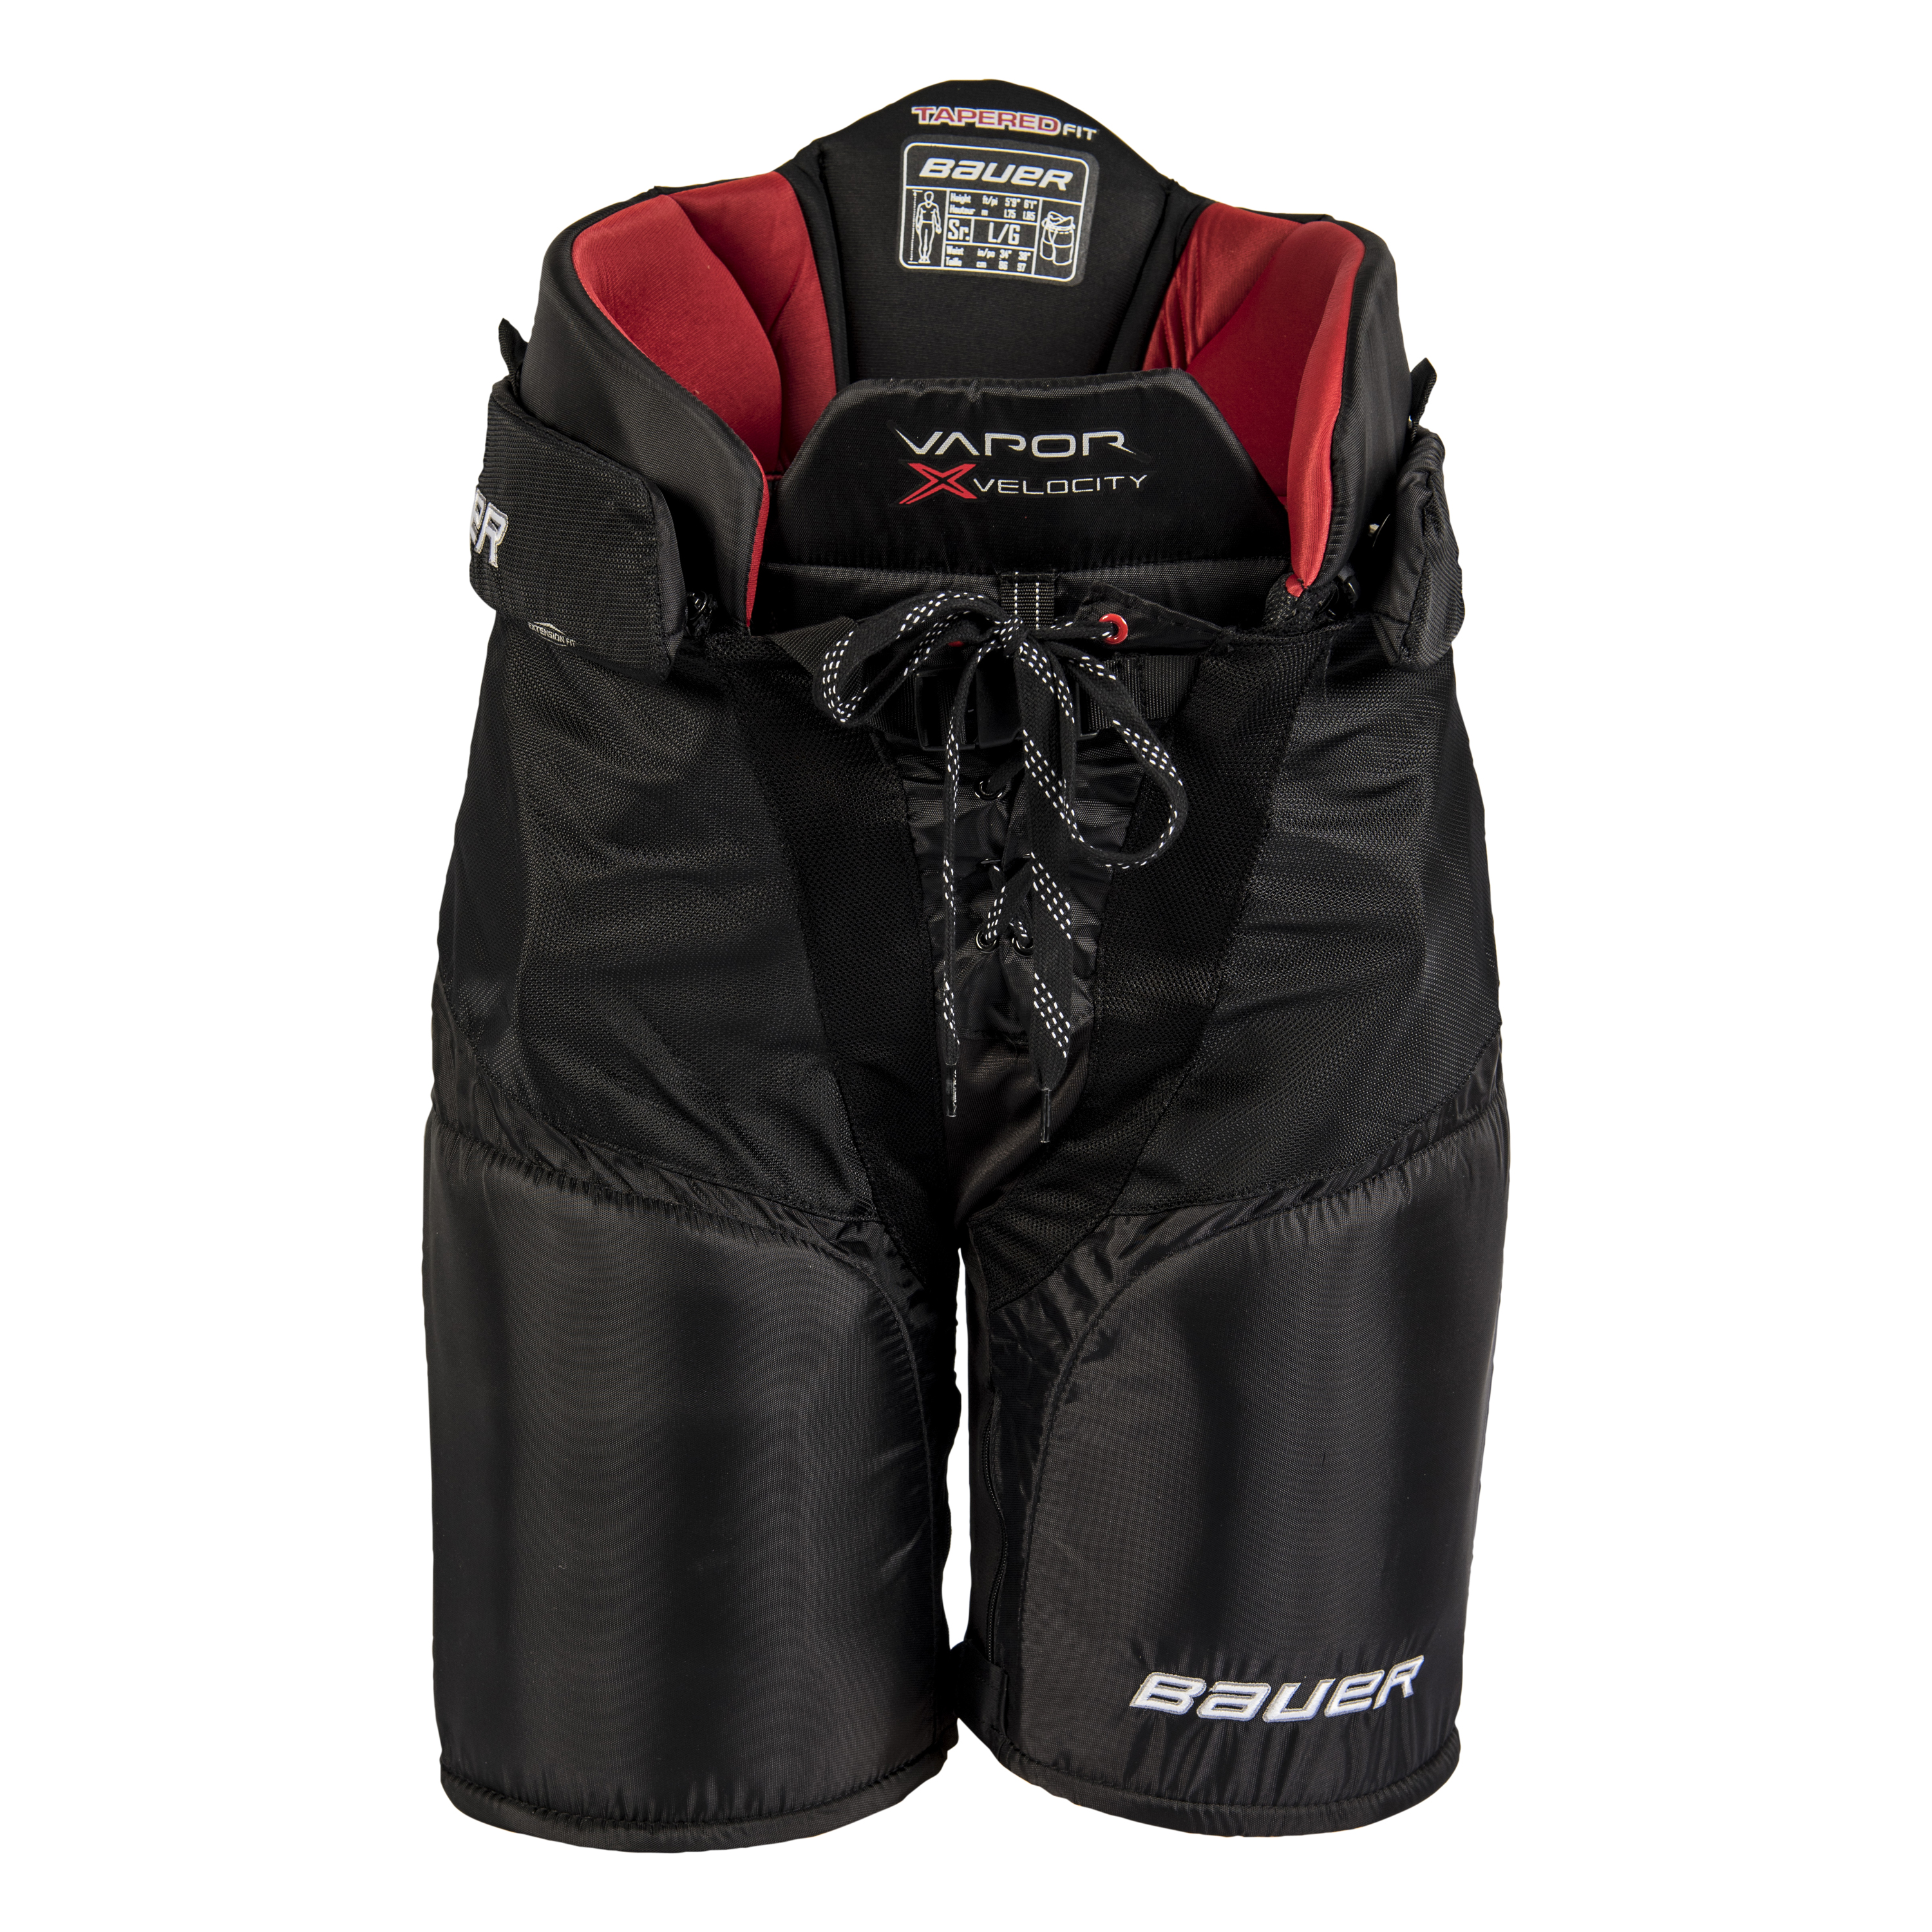 Bauer X:Velocity Protective Gear